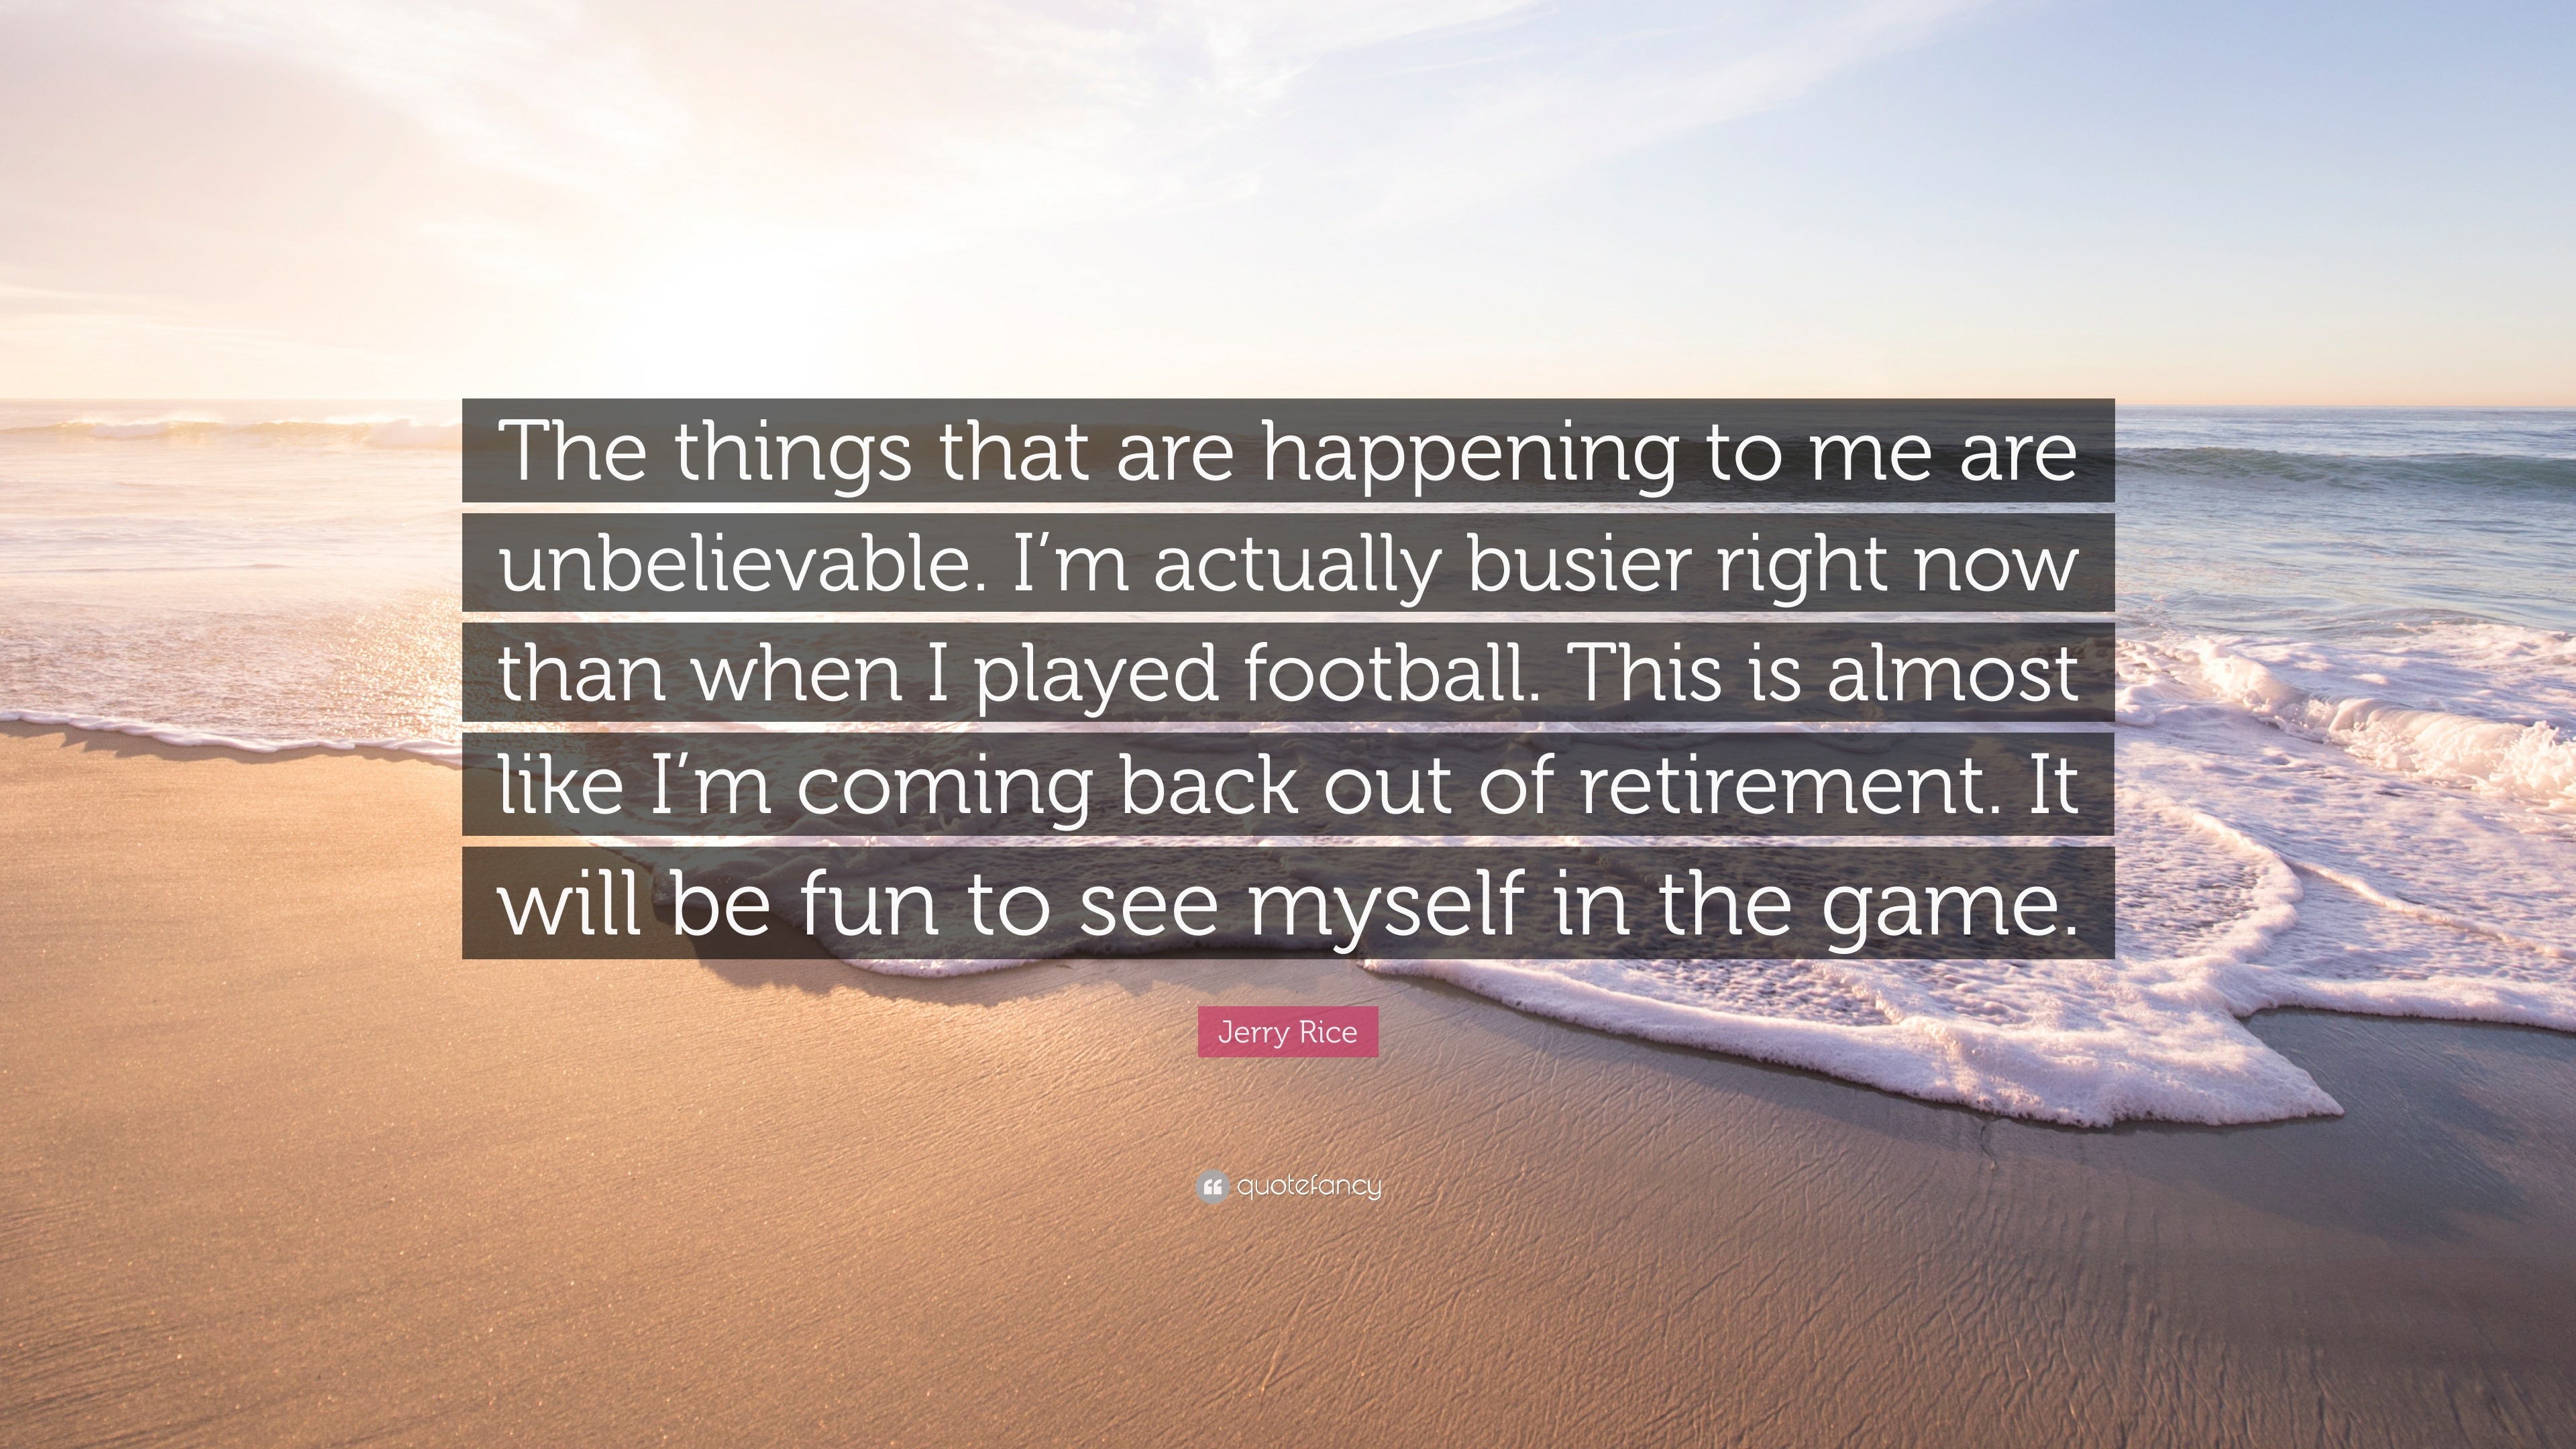 Jerry Rice Quote The Things That Are Happening To Me Are Images, Photos, Reviews